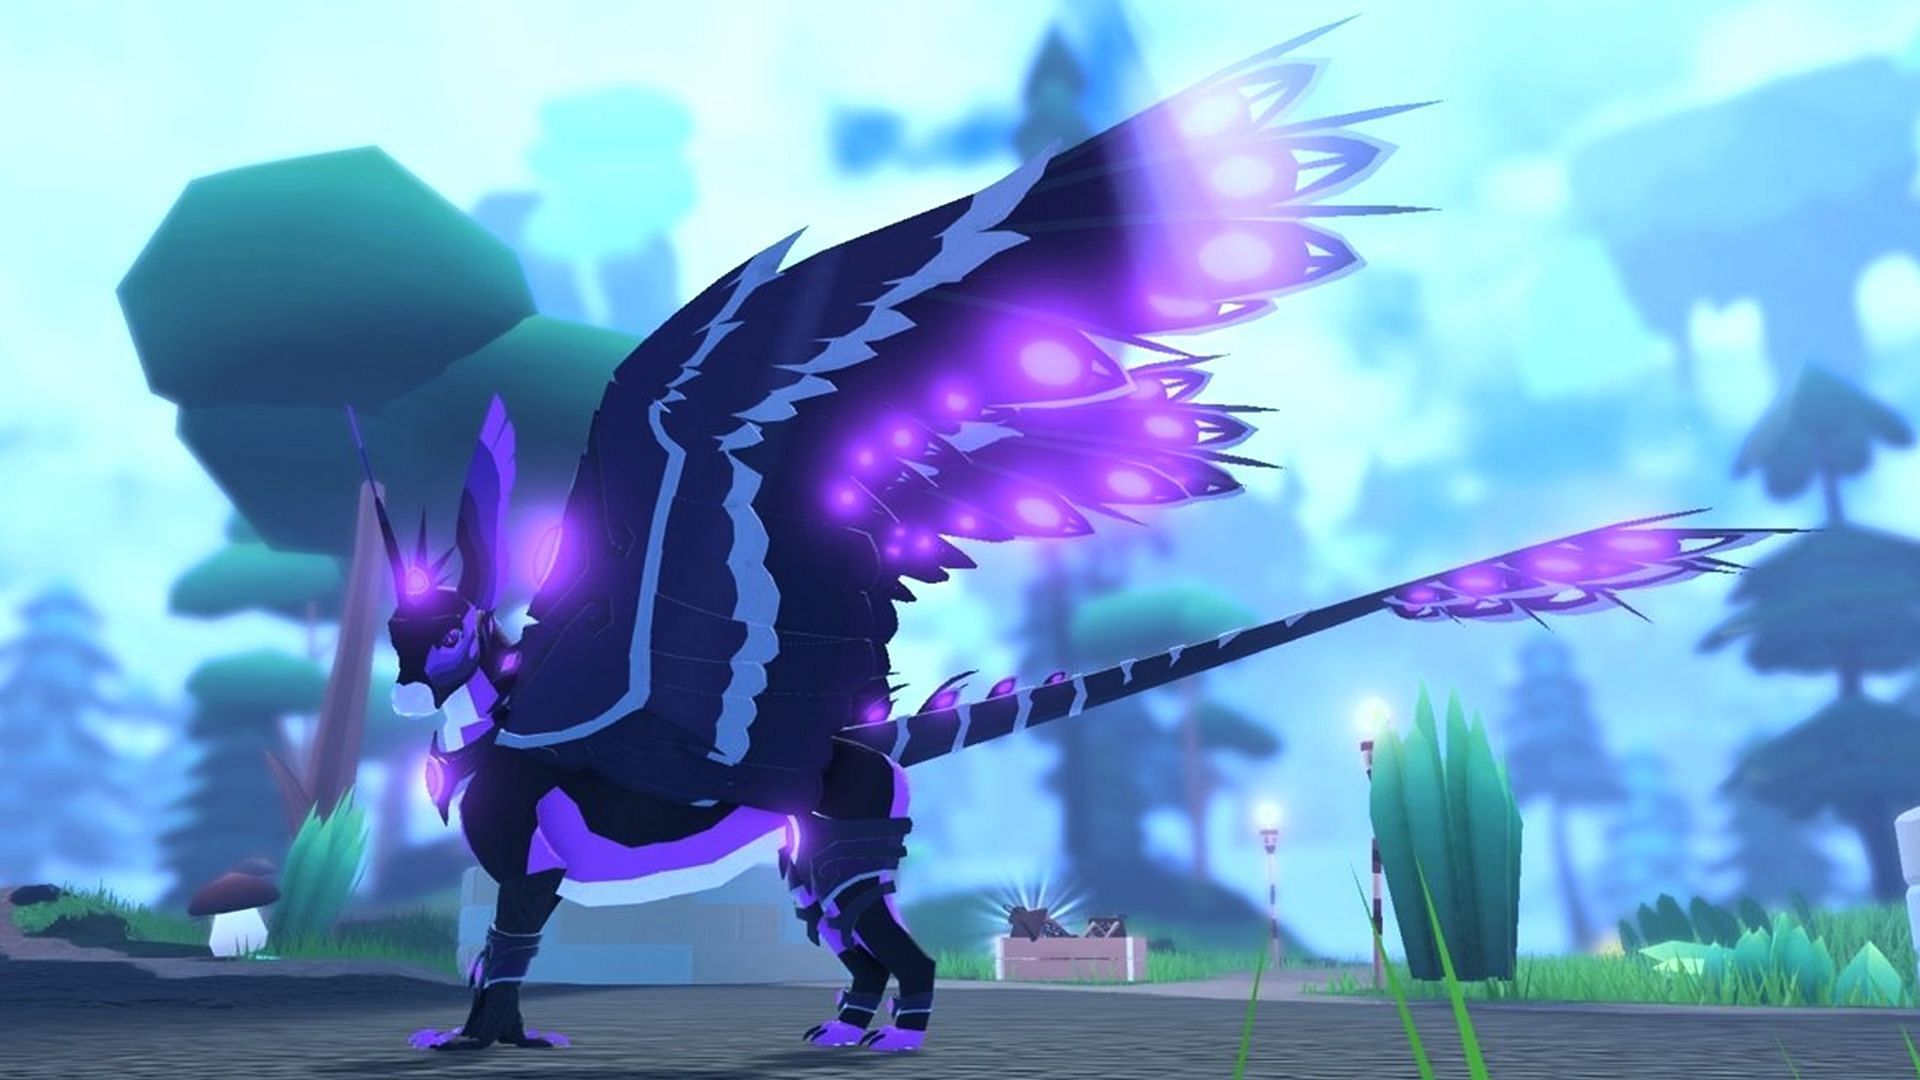 Roblox Griffin's Destiny codes for February 2023: Freebies